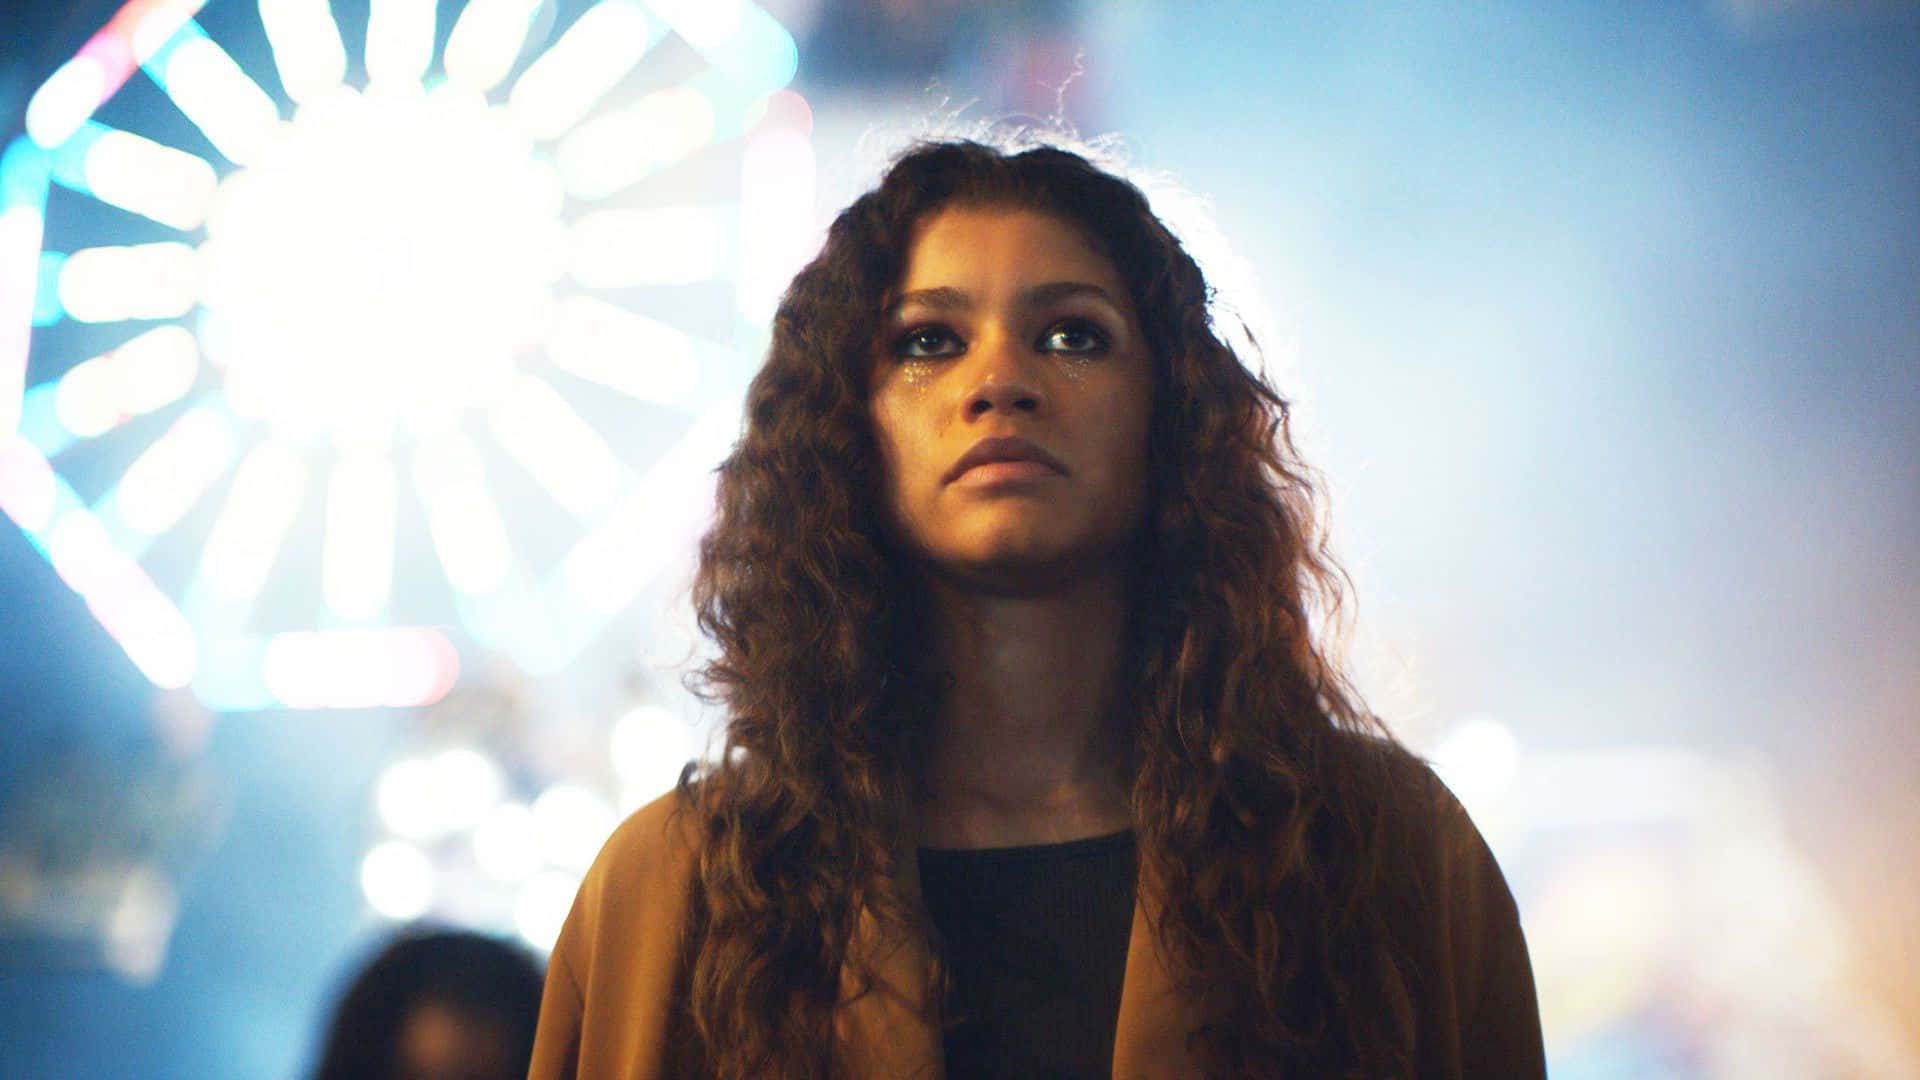 The Cast of HBO's Euphoria Returns for a Highly Anticipated Season 2 Wallpaper